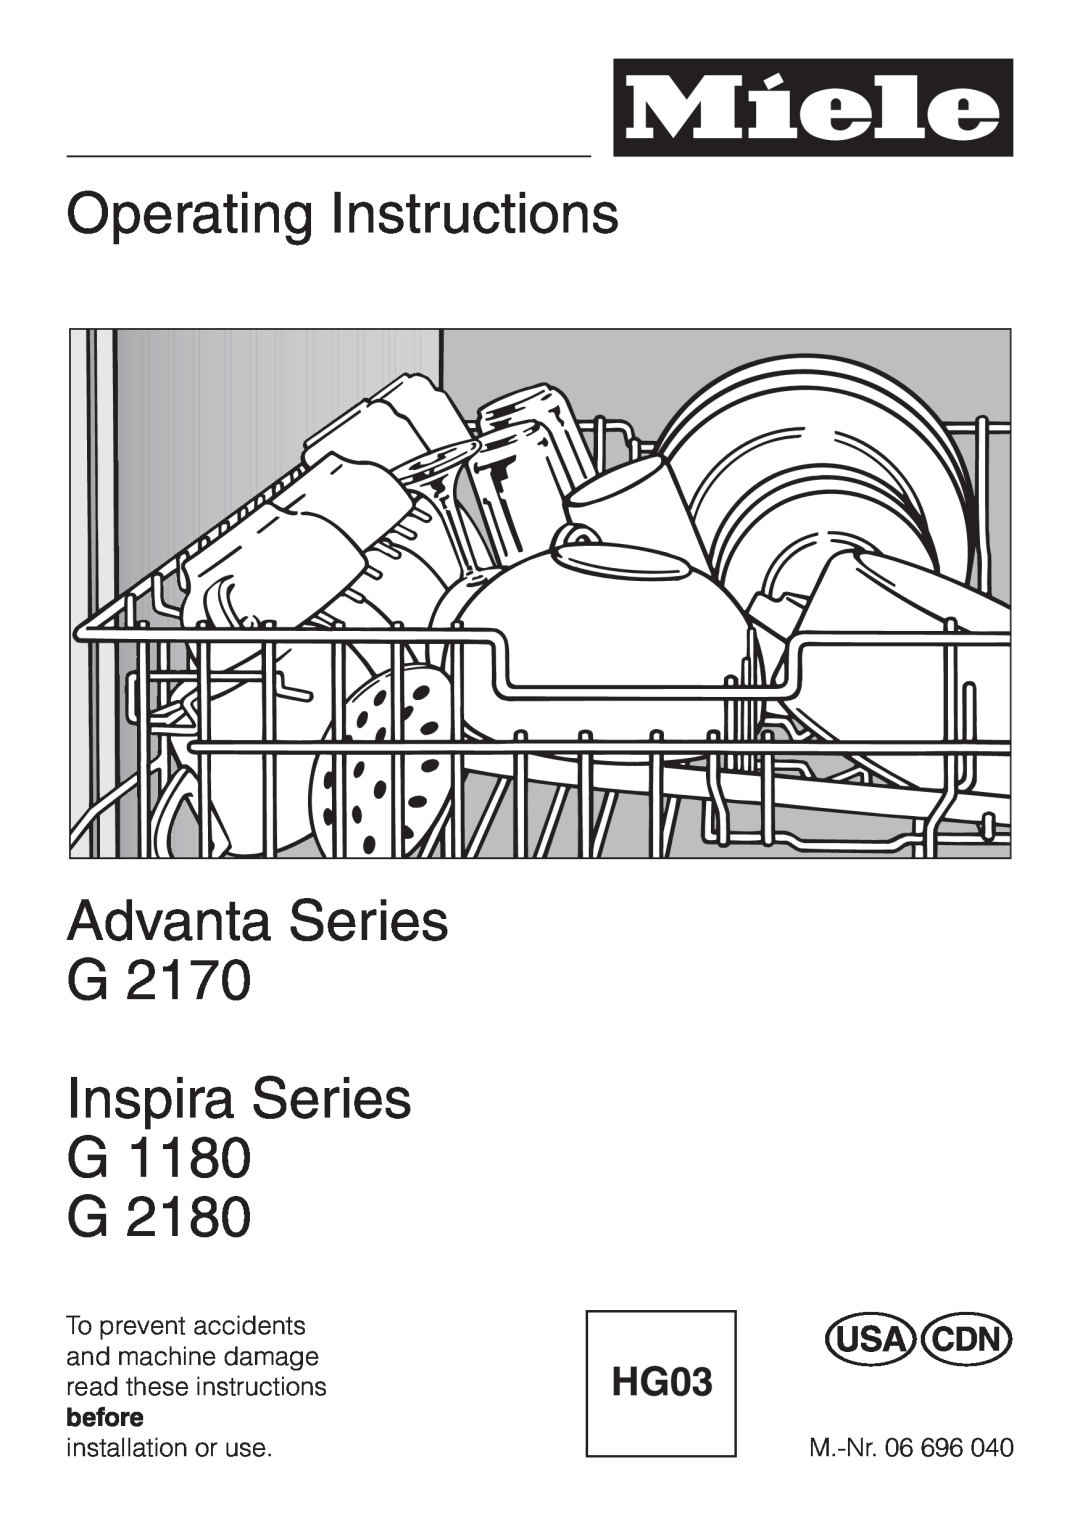 Miele G 2180, G 2170 operating instructions Operating Instructions Advanta Series G, Inspira Series G1180 G2180 